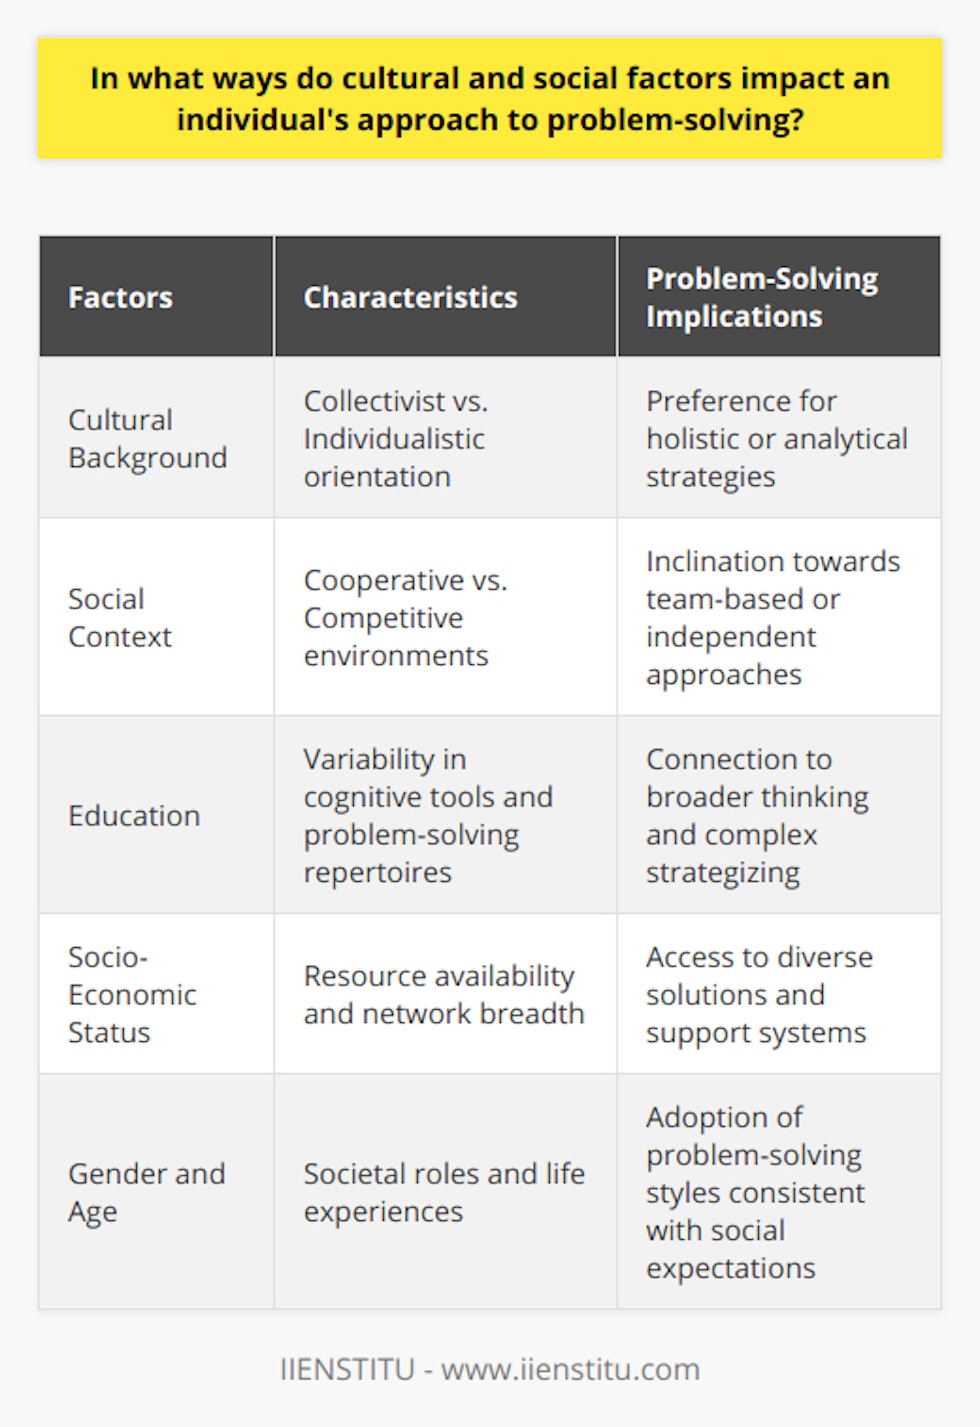 The process of problem-solving is a complex interplay of cognitive functions shaped by an array of cultural and social factors. These factors articulate the strategies and methods individuals use when confronted with challenges.The Influence of Cultural Background on Problem-SolvingCultural nuances significantly influence how individuals perceive and tackle problems. For instance, people hailing from collectivist societies, such as many Asian countries, are inclined to address problems through a lens that scrutinizes the situation holistically. This includes taking into account the interconnectedness of elements and the ways in which relational dynamics impact the dilemma at hand. Such holistic problem-solving strategies are a testament to the integrated worldview that many Eastern cultures embody.Conversely, individuals raised in individualistic cultures, predominantly found in the West, may be drawn to more analytical methods. They often segment the challenge into constituent parts and address each component in isolation. This reflects the value that Western societies place on autonomy and a more singular focus which can lead to thorough, but sometimes contextually limited, solutions.Social Factors and Problem-Solving ApproachesSocial context is another potent determinant of problem-solving styles. A person nurtured in an environment that stresses cooperation may naturally select cooperative problem-solving strategies. These strategies are inherently inclusive, engaging others in the process and valuing group input. Such individuals might leverage discussion, seek consensus, and embrace shared success.Alternatively, in a society that celebrates competitive success, problem-solving tends to be a solo venture. Individuals learn to rely on their own abilities, fostering a sense of individual achievement and independence. Socially competitive settings may cultivate problem solvers who are focused on personal innovation and results, occasionally at the expense of collaborative processes.The Role of Education and Socio-Economic StatusEducational background provides individuals with varying methods and cognitive tools to apply to problem-solving. A higher level of education can broaden an individual's horizons and present a wider repertoire of strategies. Conversely, socio-economic status can affect access to resources that facilitate divergent thinking—an individual with more resources at their disposal may have the luxury of exploring a range of solutions that others might not.Similarly, variations in socio-economic conditions can surface in individuals’ problems as well as their solutions, thereby influencing problem-solving approach. Those from higher socio-economic backgrounds often have access to wider networks and opportunities that can aid in resolution, while those from less affluent backgrounds may need to use more creative or resourceful methods within their means.Gender, Age, and Problem-SolvingGender roles and age-related expectations also tailor an individual’s approach to problem-solving. Societal constructs around gender can funnel men and women into adopting different styles, potentially aligning with traditional gender roles. Meanwhile, the dimension of age contributes to differences in problem-solving due to the accumulation of life experience, risk assessment, and patience levels.In synthesis, it is evident that an individual's approach to problem-solving cannot be detached from the influence of their cultural and social fabric. Recognizing how these elements uniquely combine to shape the cognitive strategies of an individual provides critical insight into human behavior. By acknowledging the holistic nature of these influences, we can begin to foster more effective and universally adaptable problem-solving techniques.